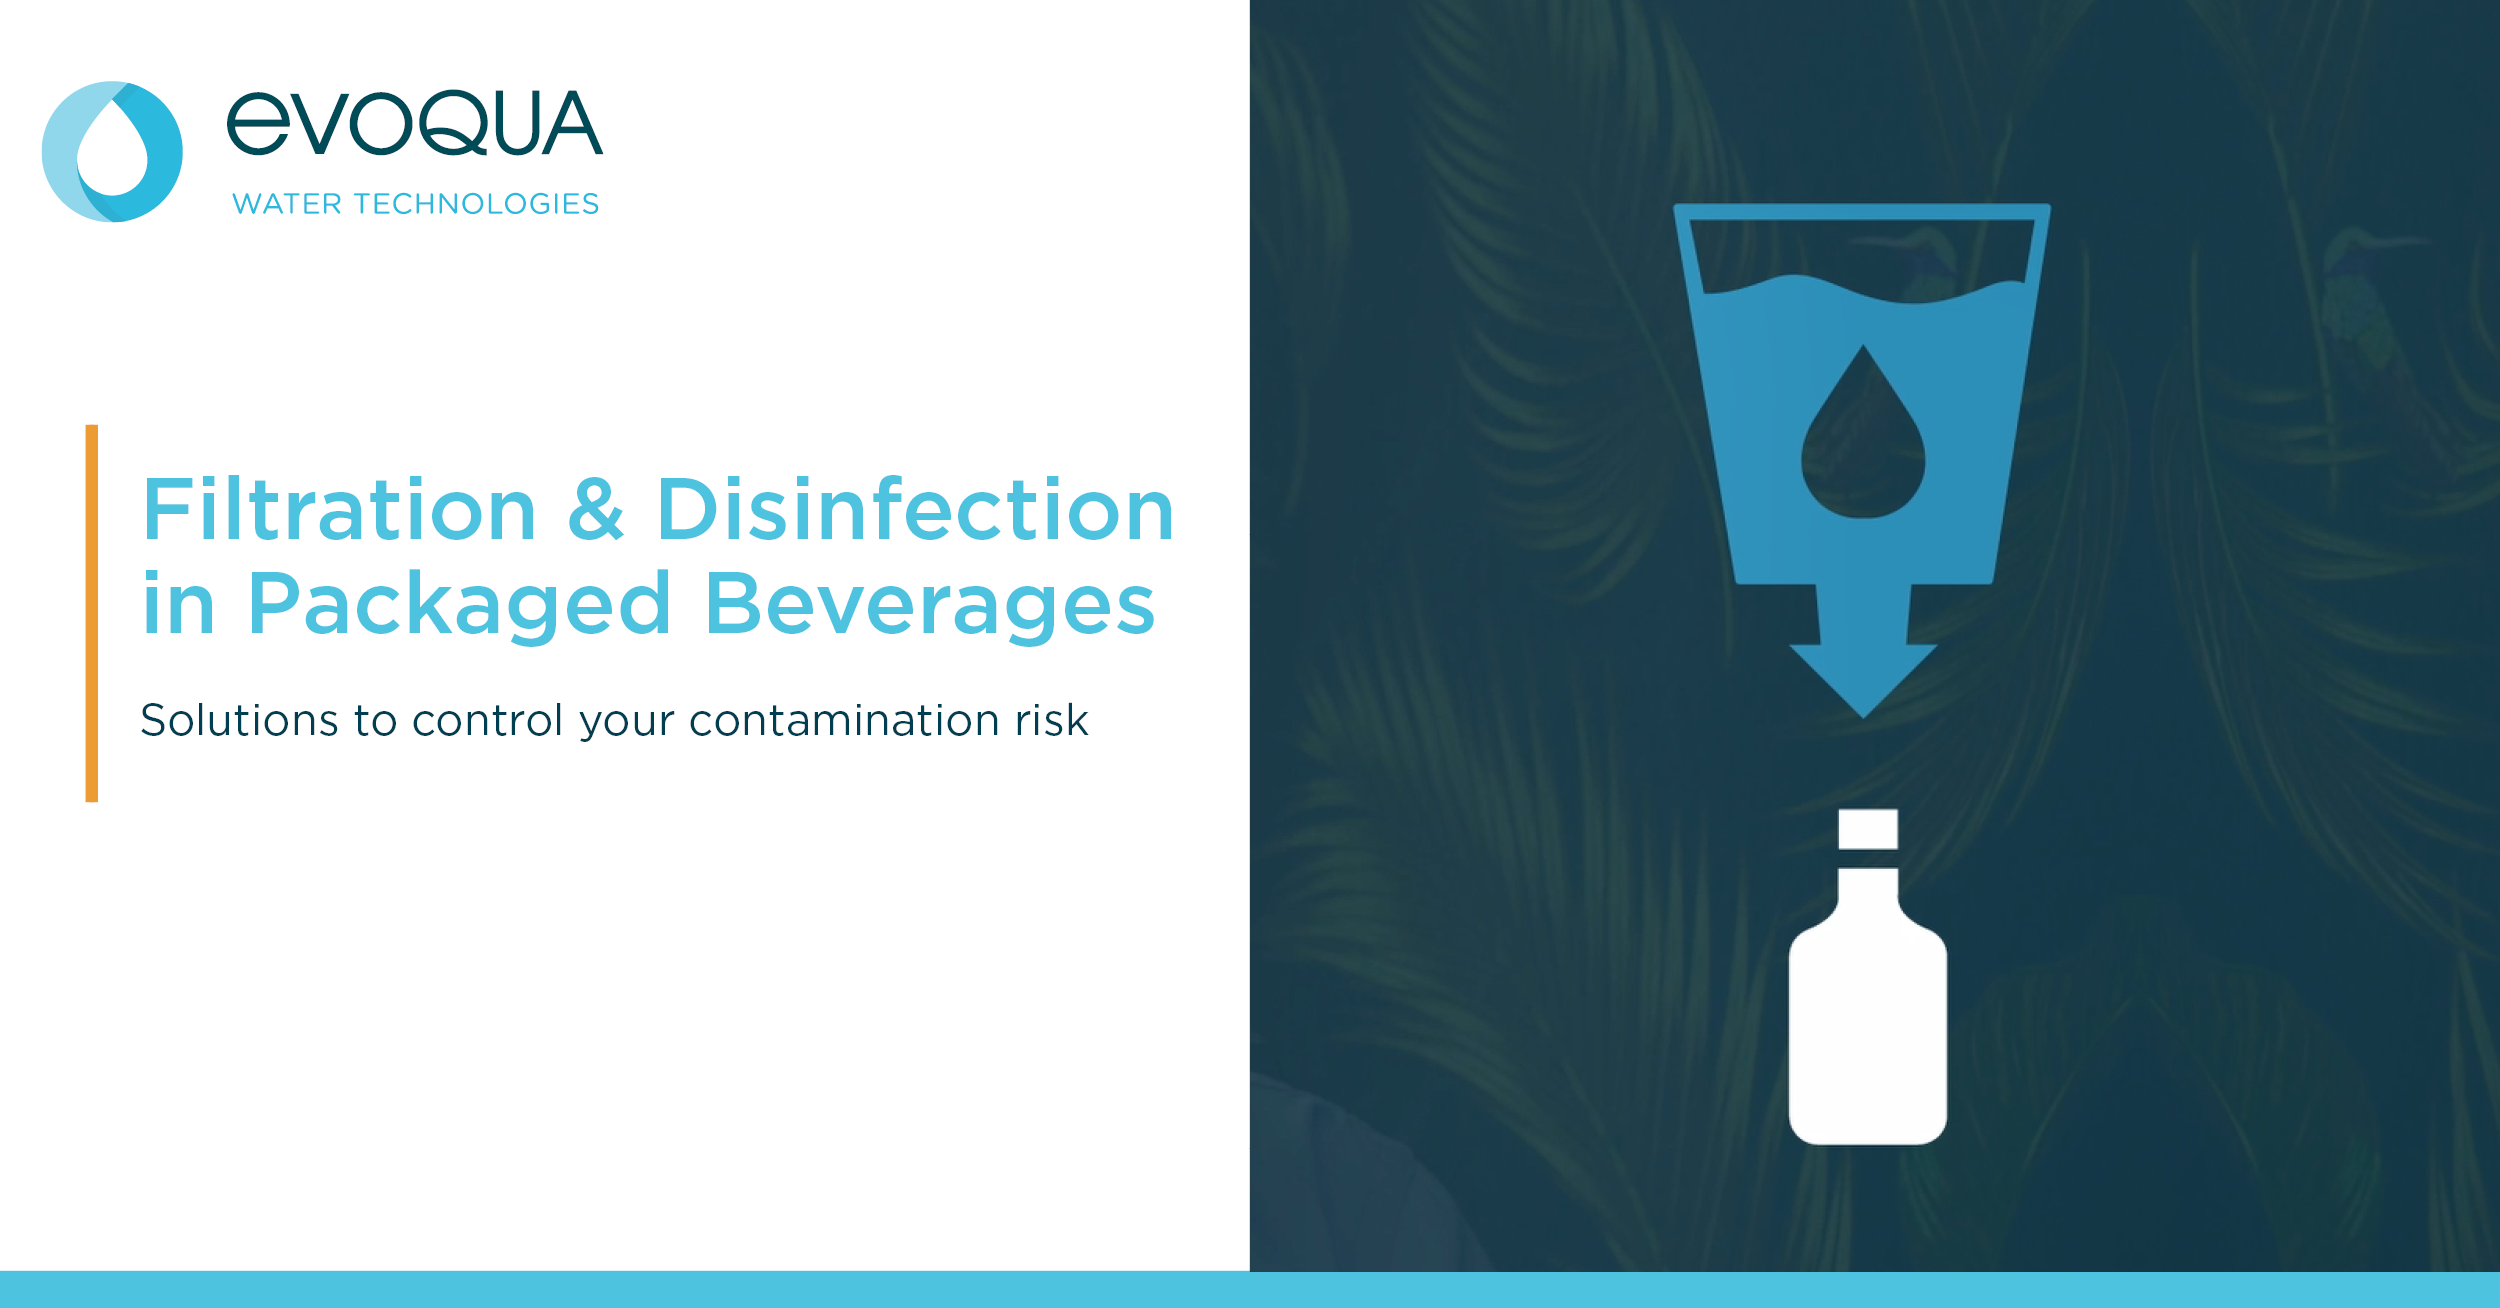 Filtration and disinfection in packaged beverages